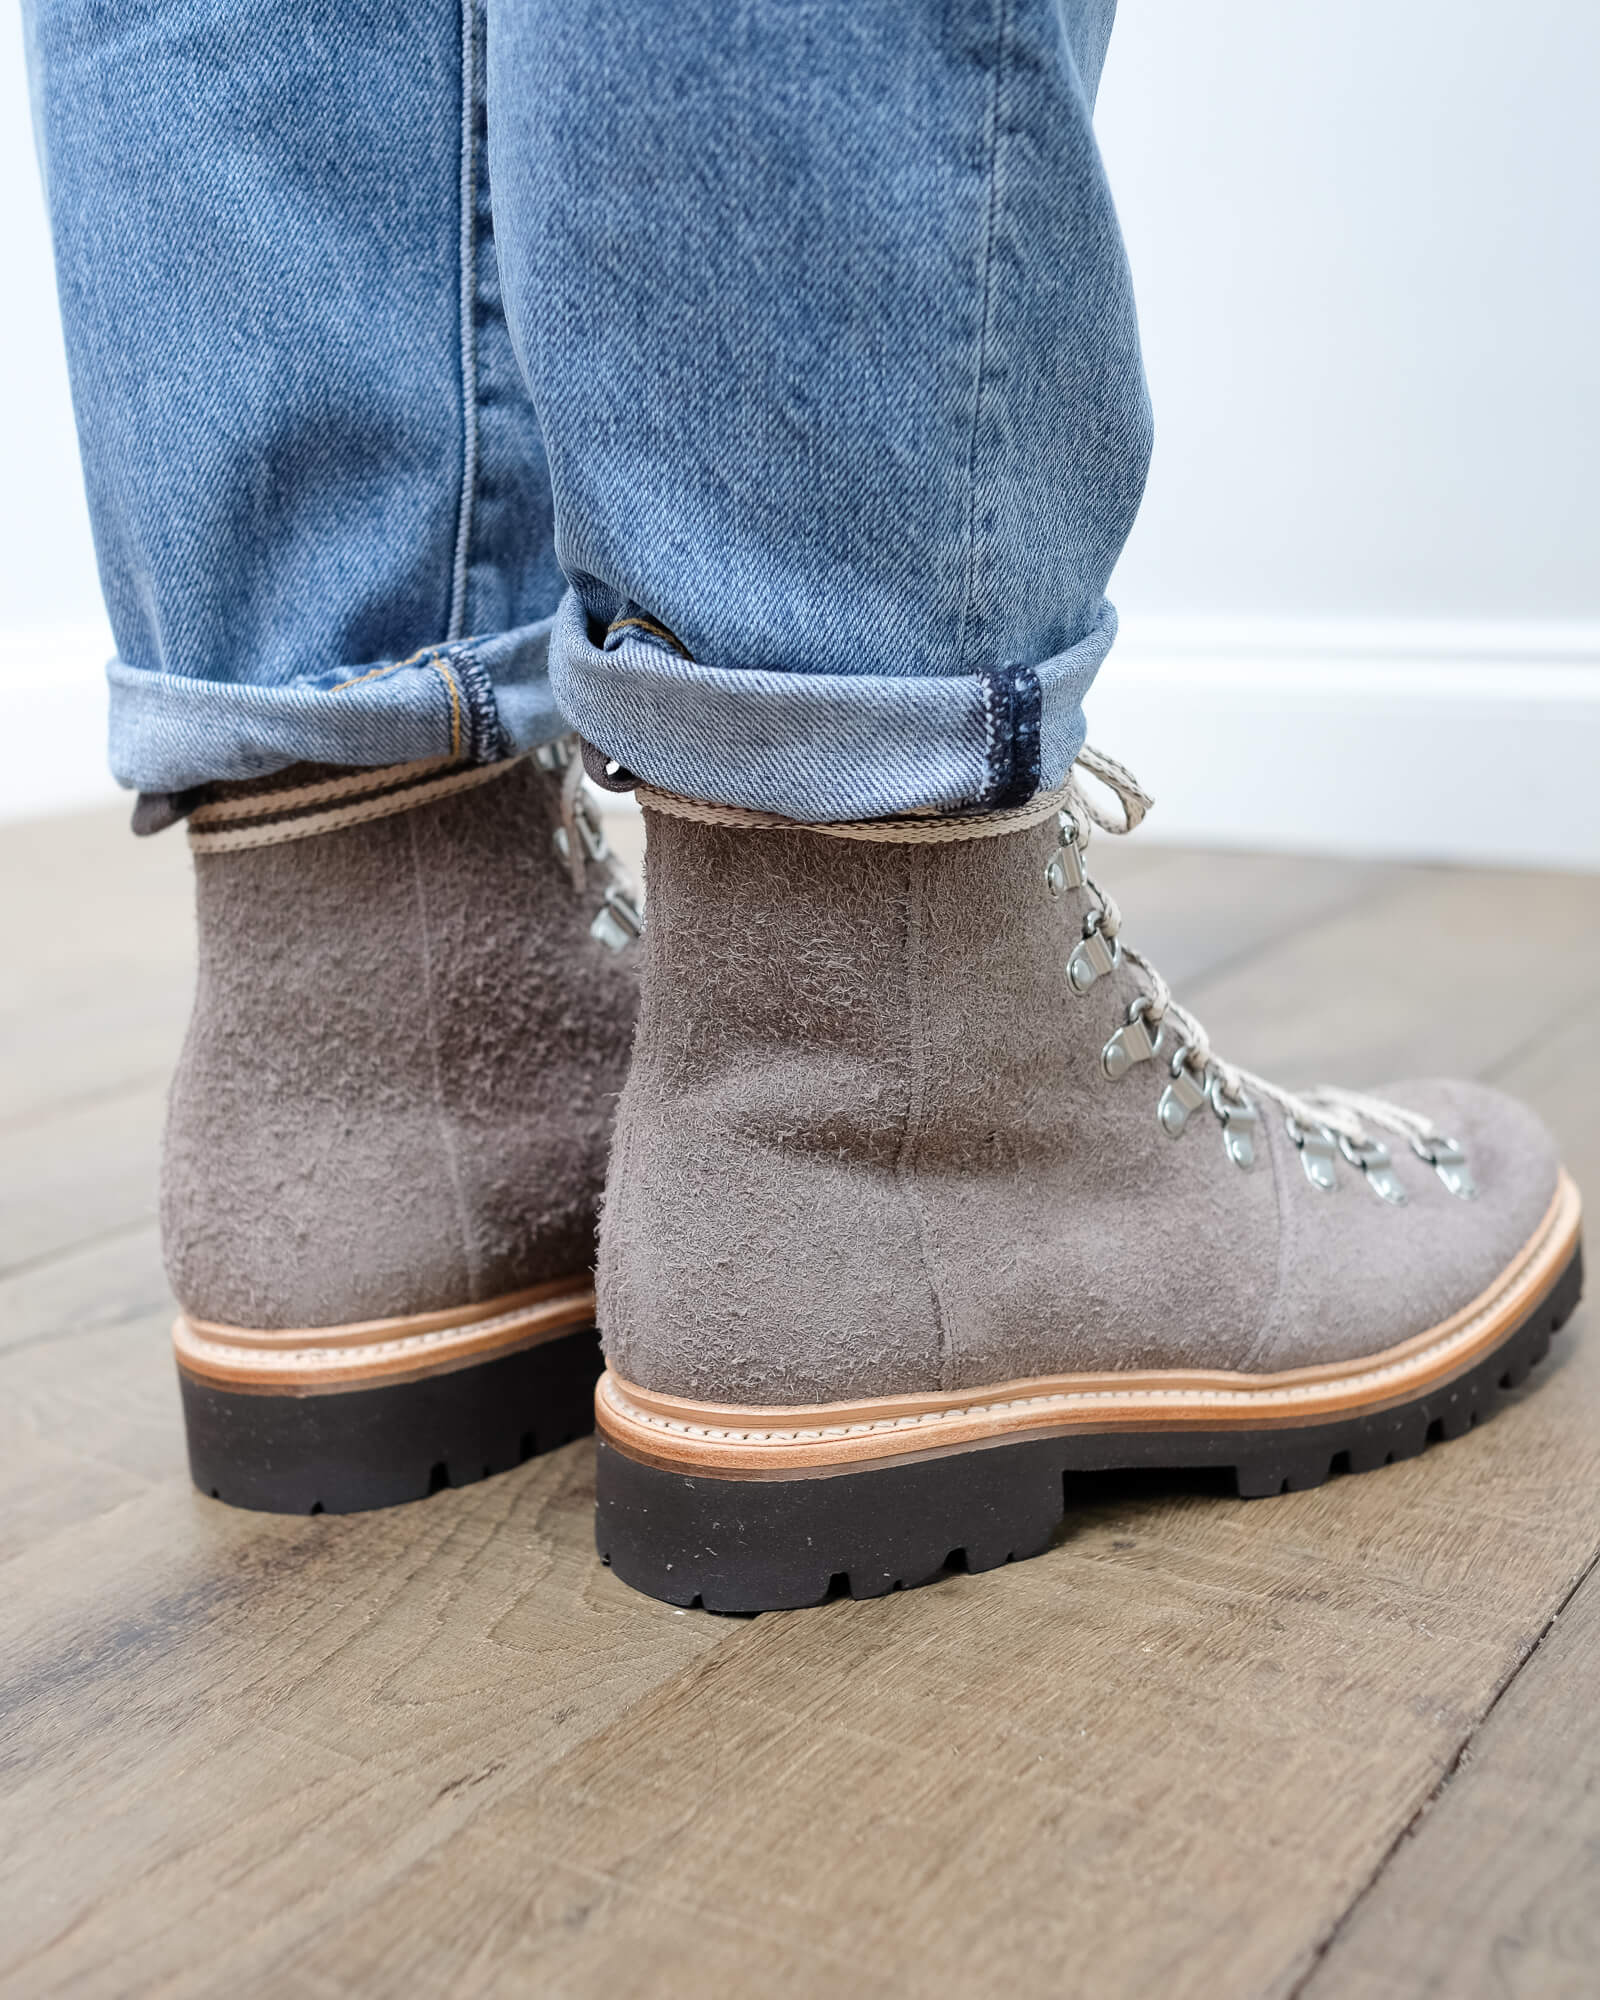 Grenson Nanette vigogna shaggy suede boots in brown